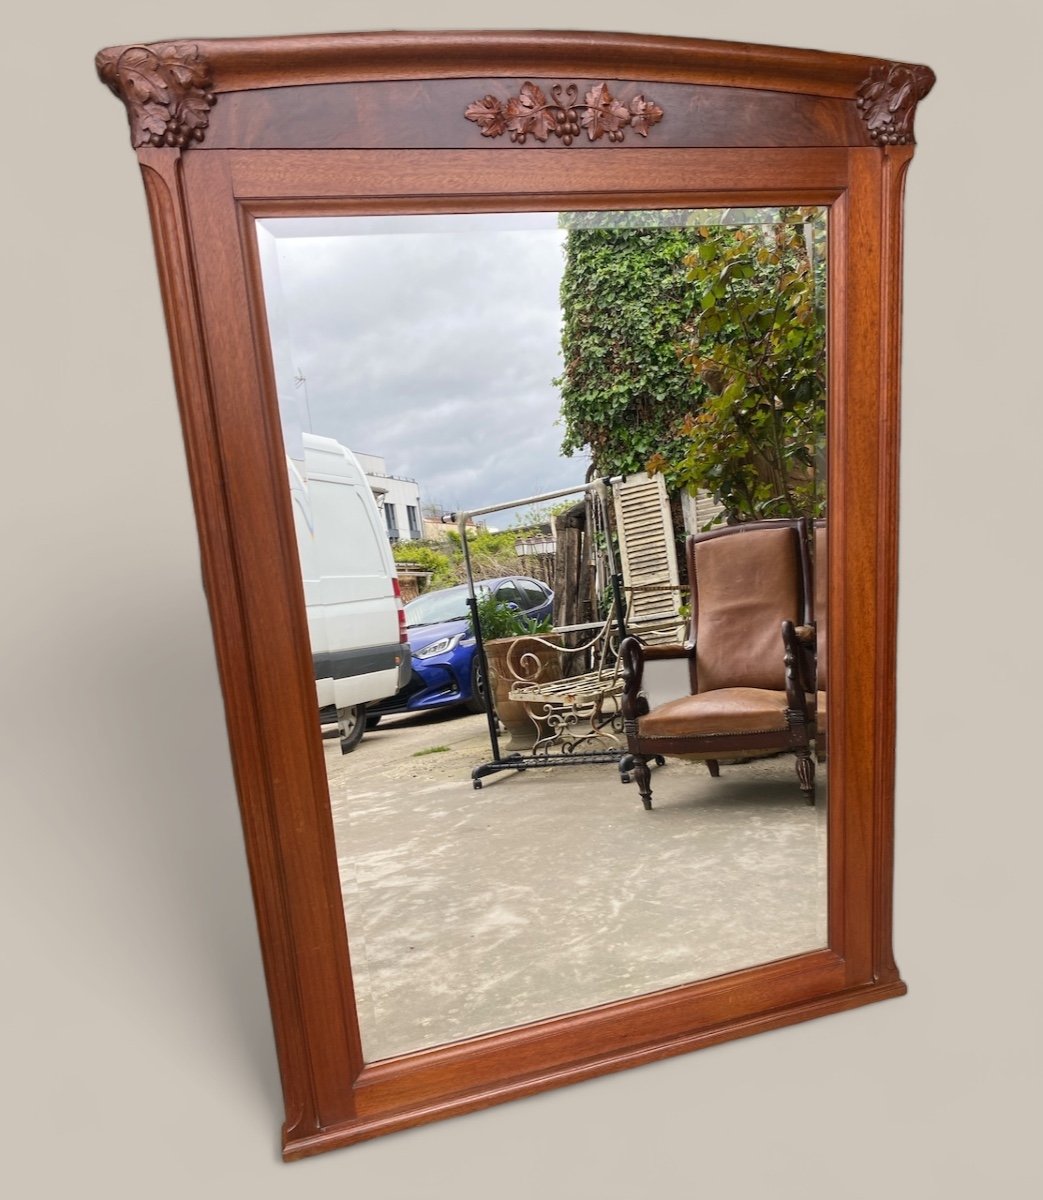 Art Nouveau Period Mirror In Mahogany, Decorated With Grapes And Vine Leaves 